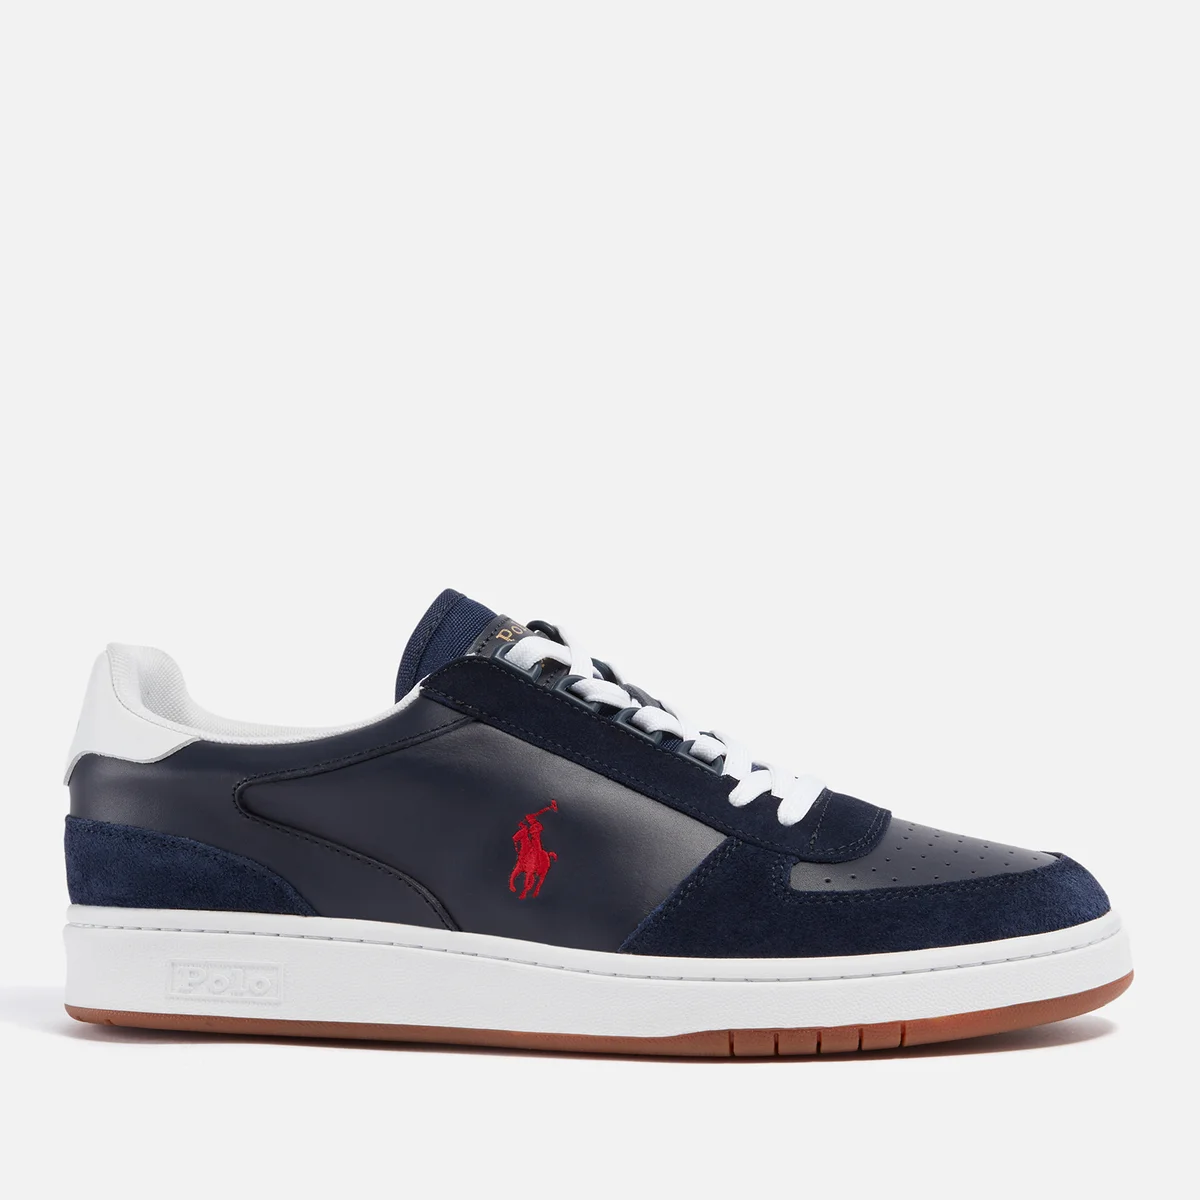 Polo Ralph Lauren Men's Polo Court Leather/Suede Trainers - Newport Navy/RL2000 Red Image 1